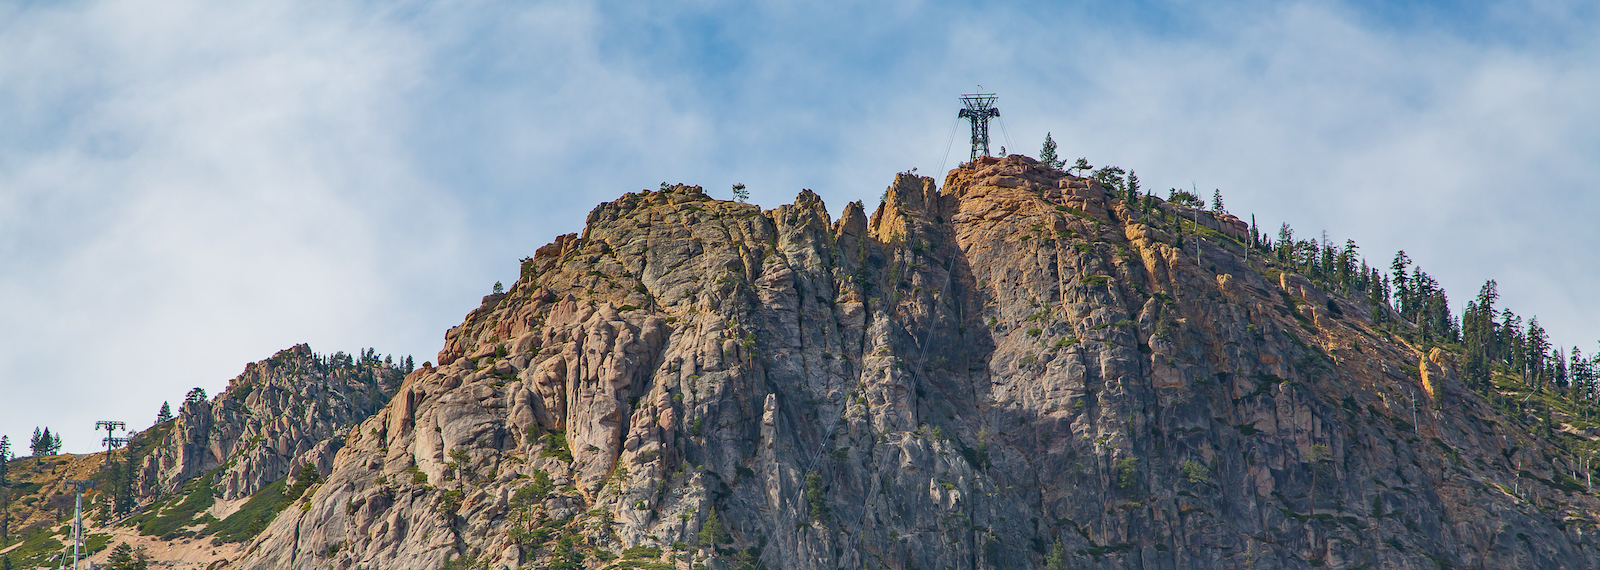 The iconic tram face and home of the Tahoe Via Ferrata